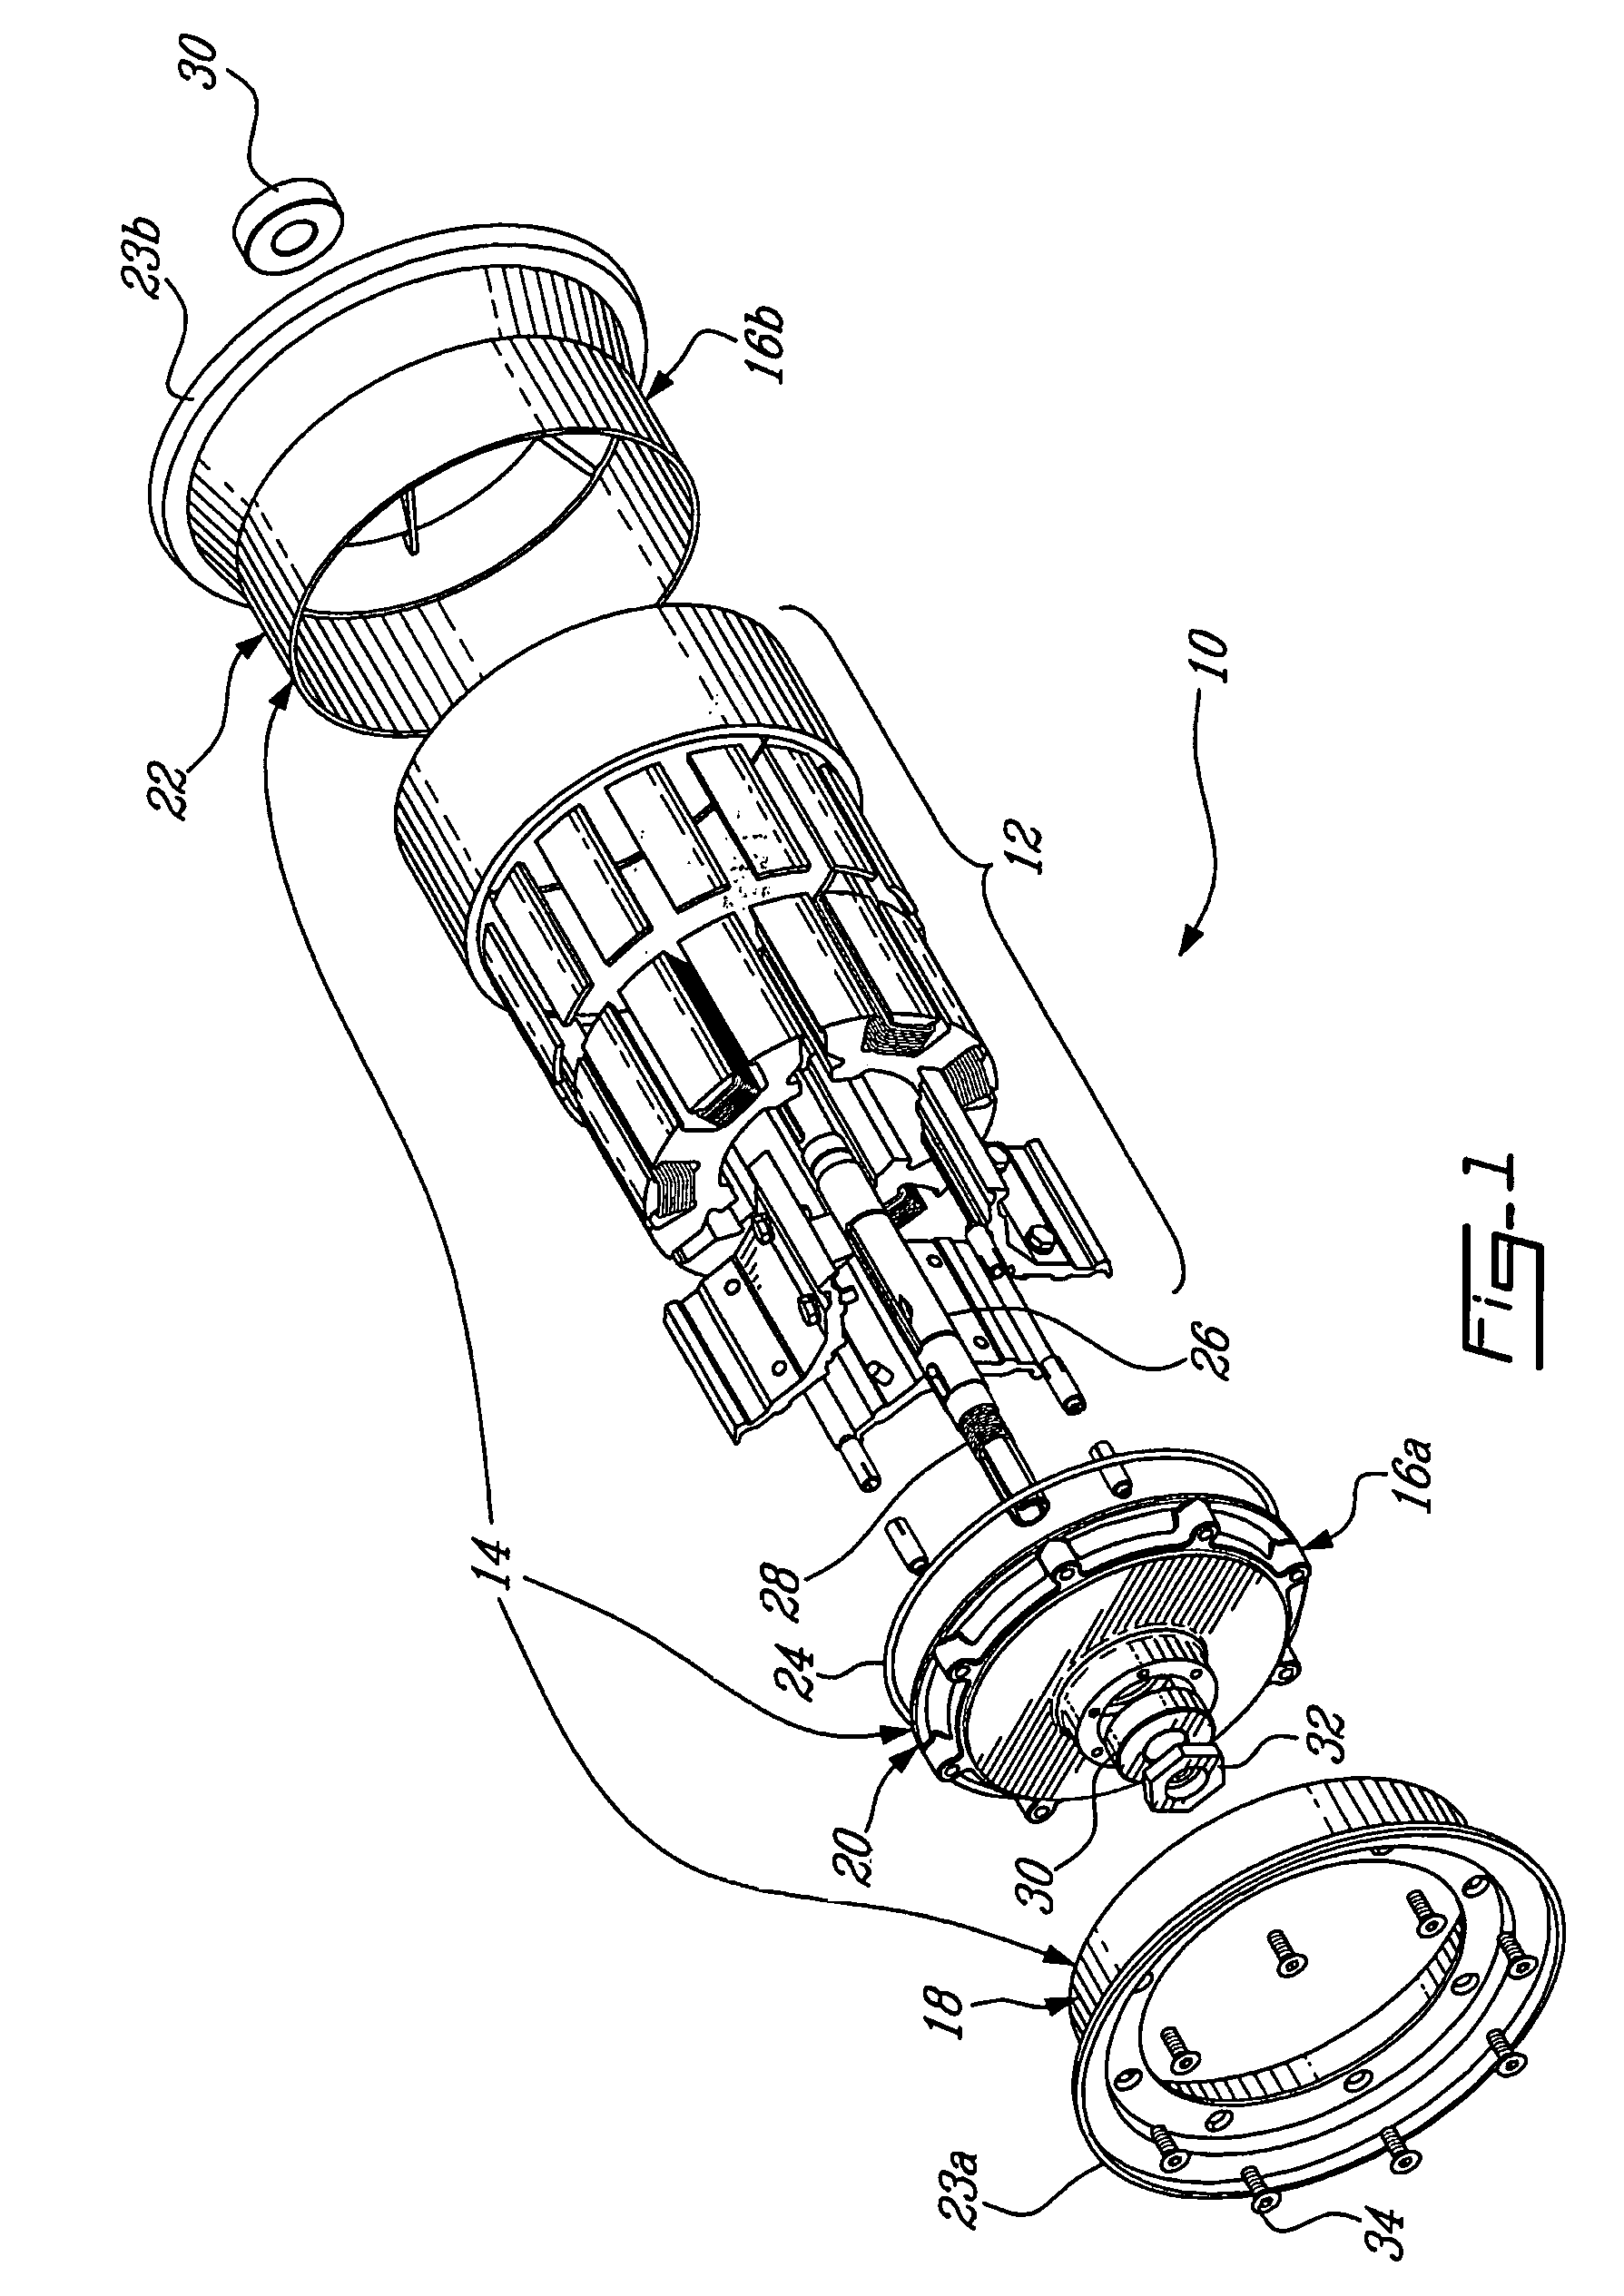 Multi-phase electrical motor for use in a wheel